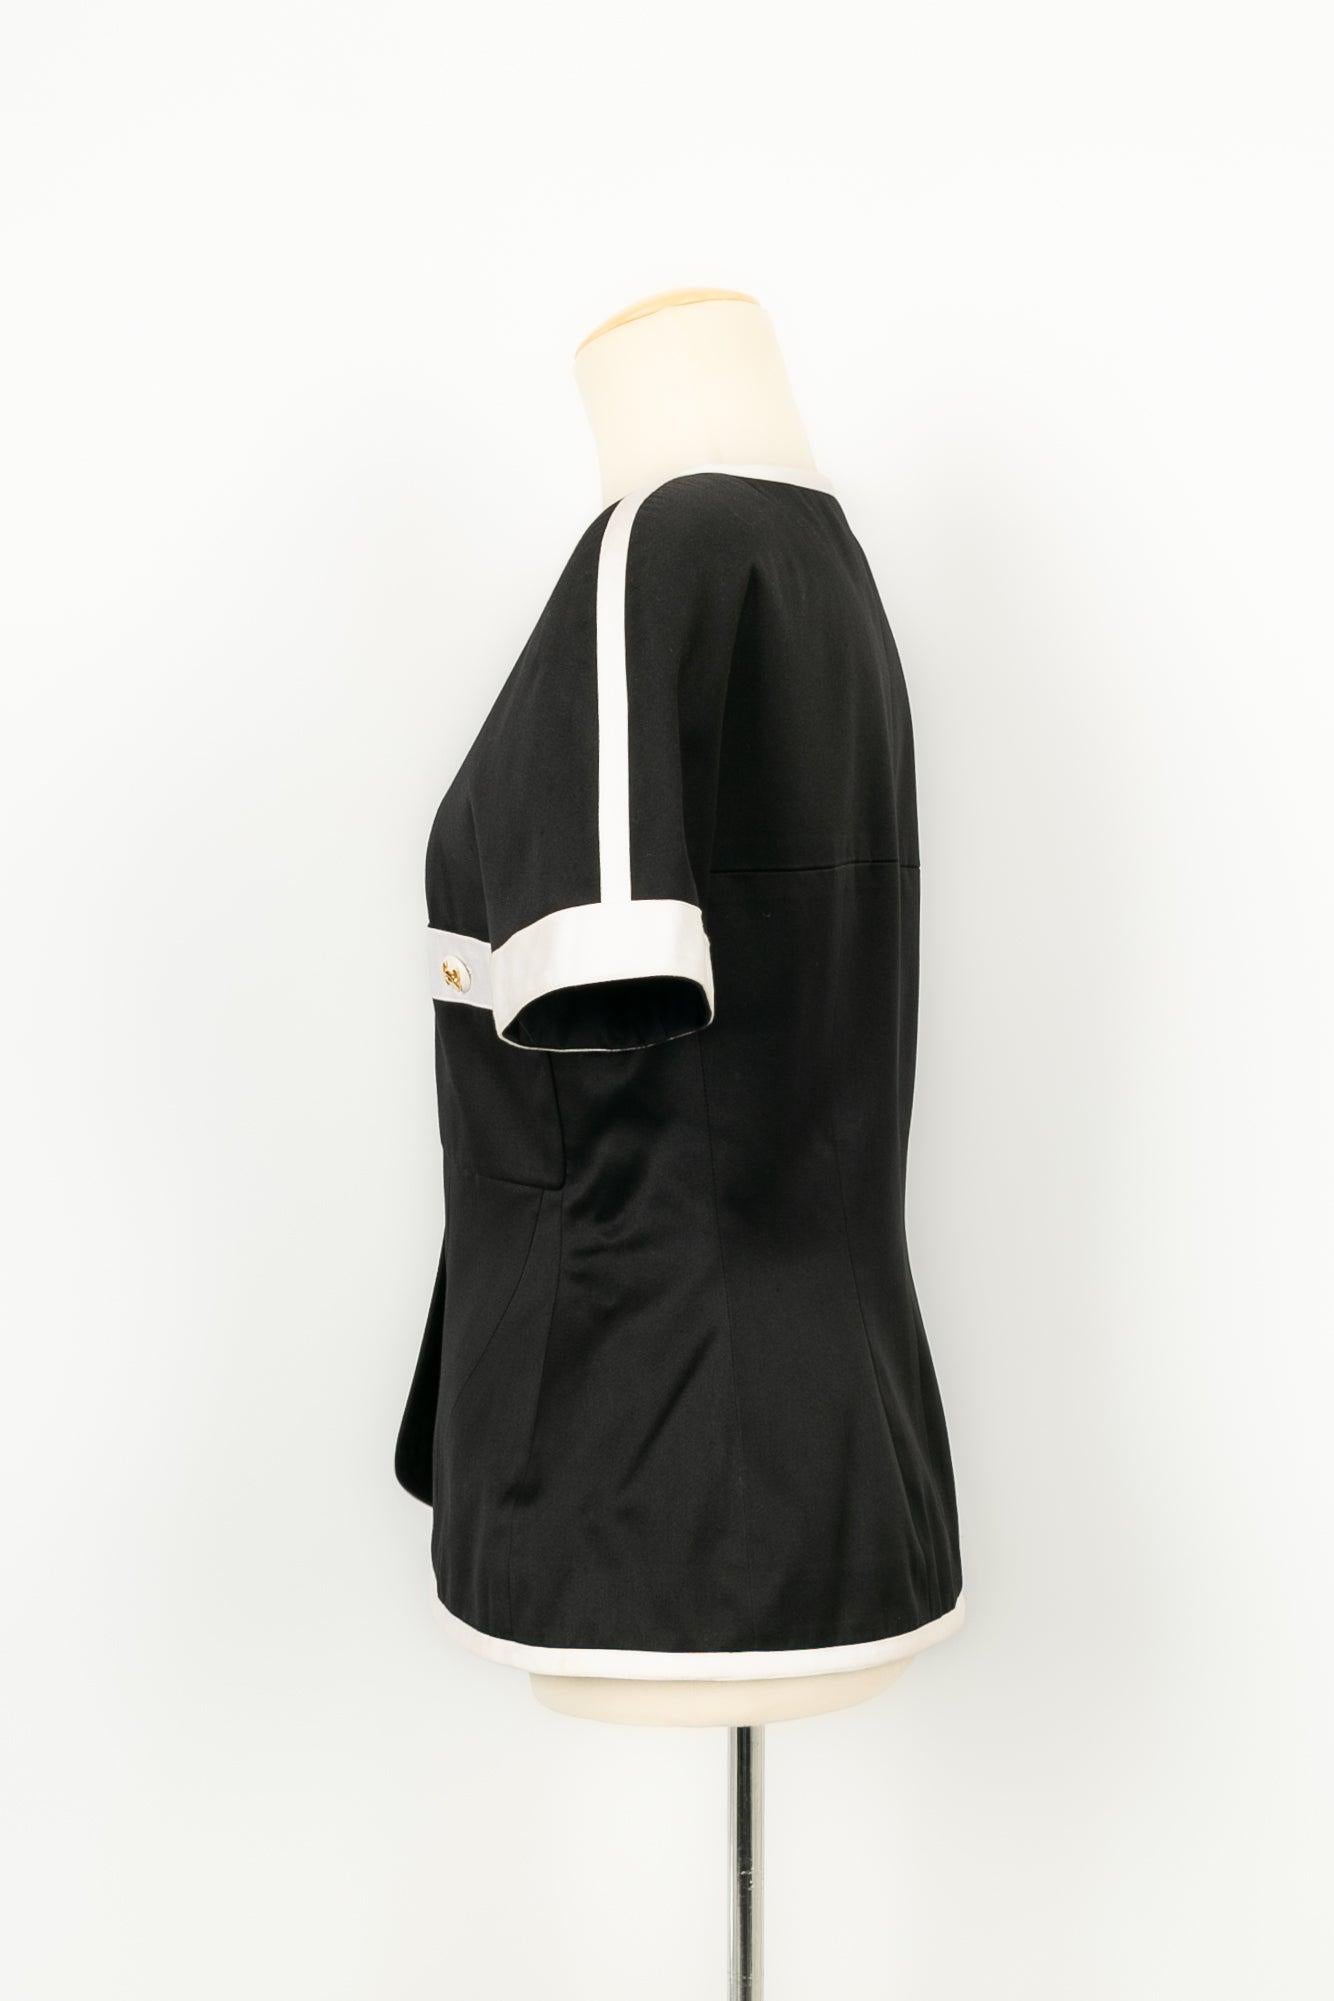 Chanel - Short-sleeved jacket in black satin edged with white satin. No size indicated, it fits a 40FR/42FR.

Additional information:
Condition: Very good condition
Dimensions: Shoulder width: 40 cm - Chest: 43 cm - Waist: 41 cm - Sleeve length: 22